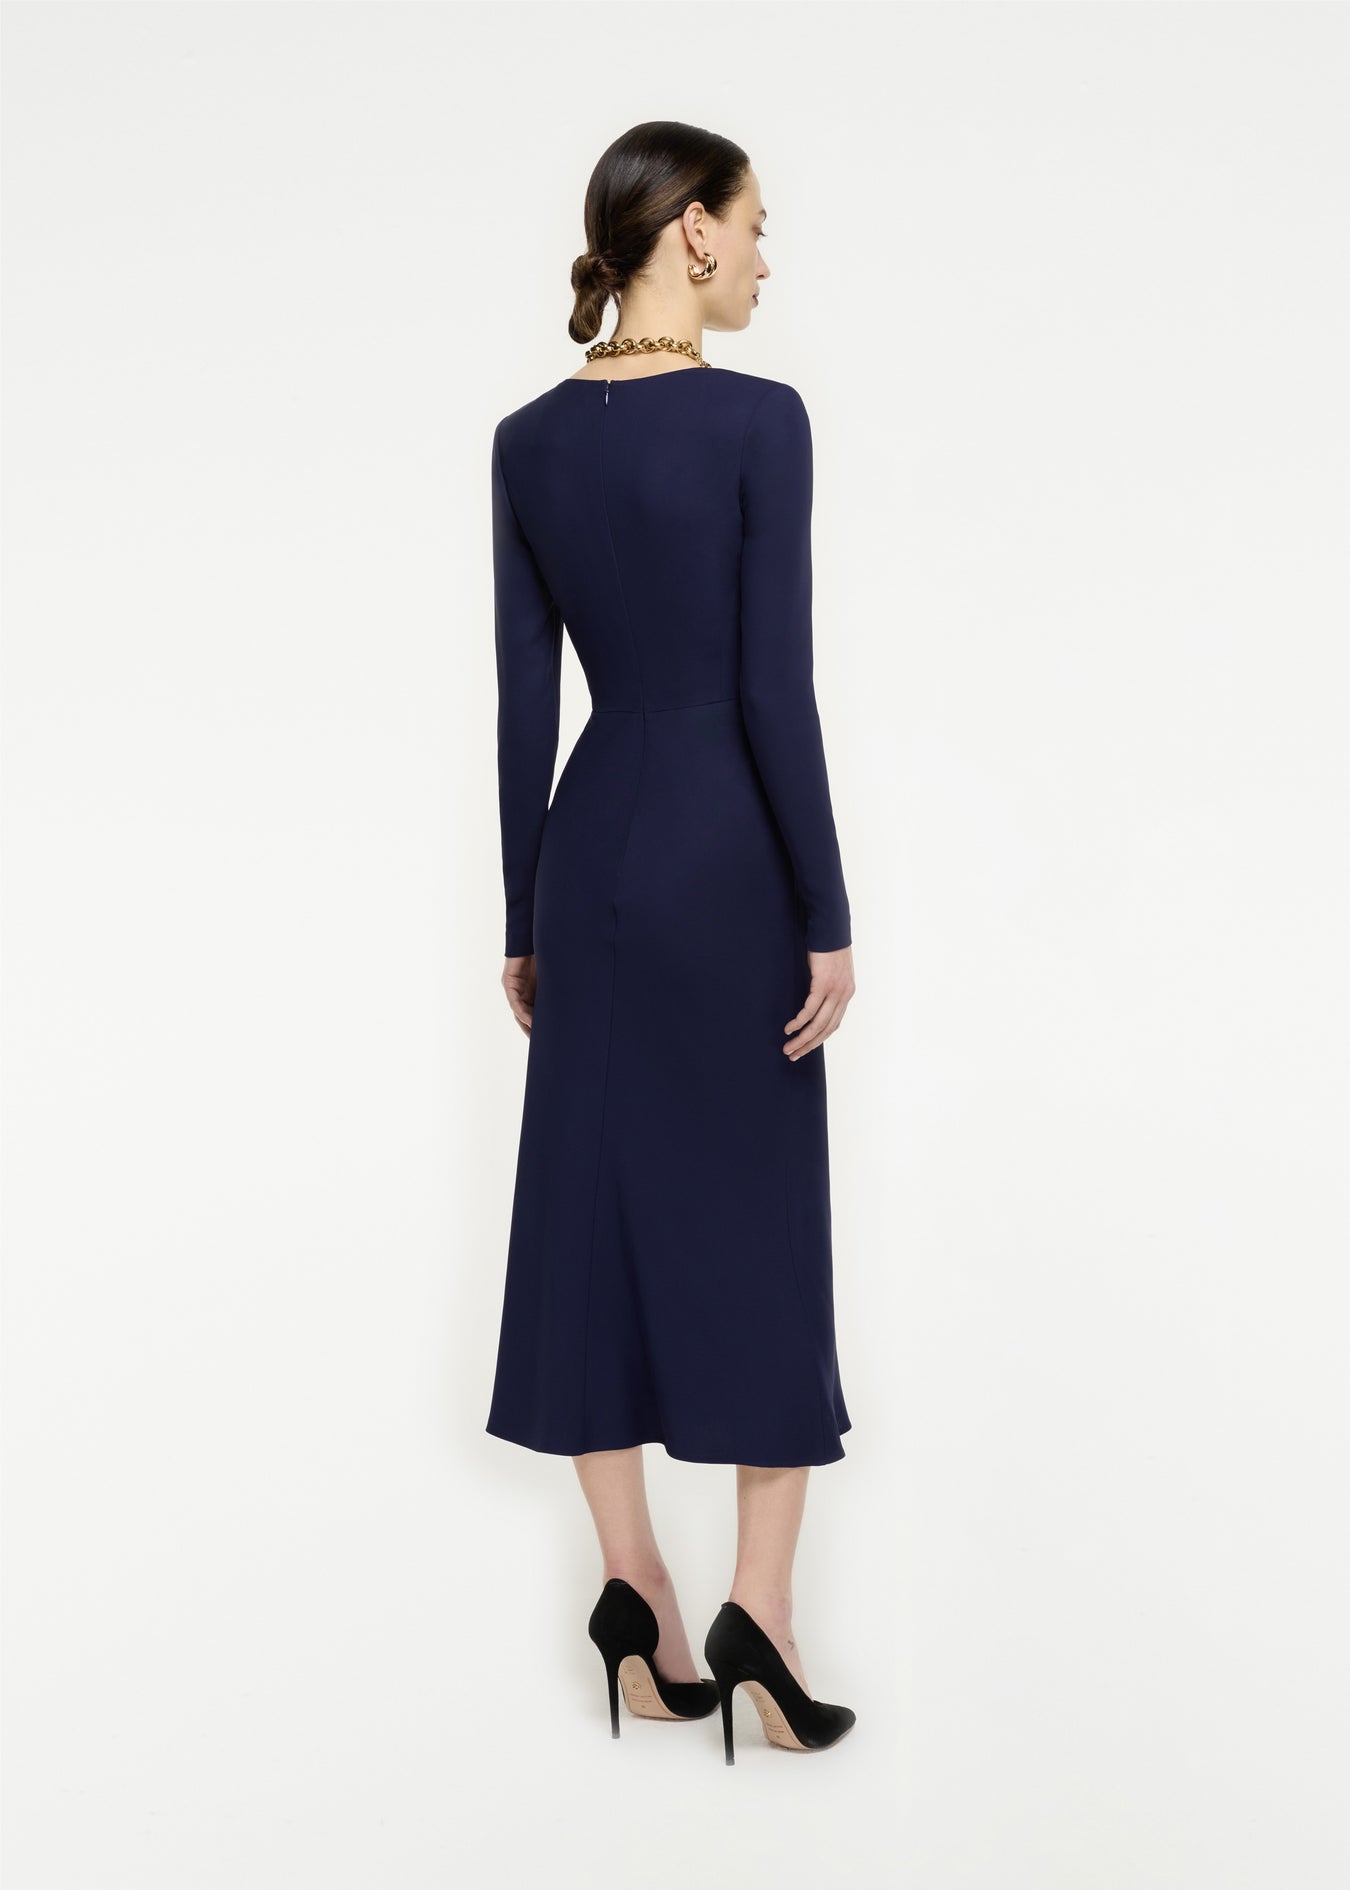 The back of a woman wearing the Long Sleeve Stretch Cady Midi Dress in Navy